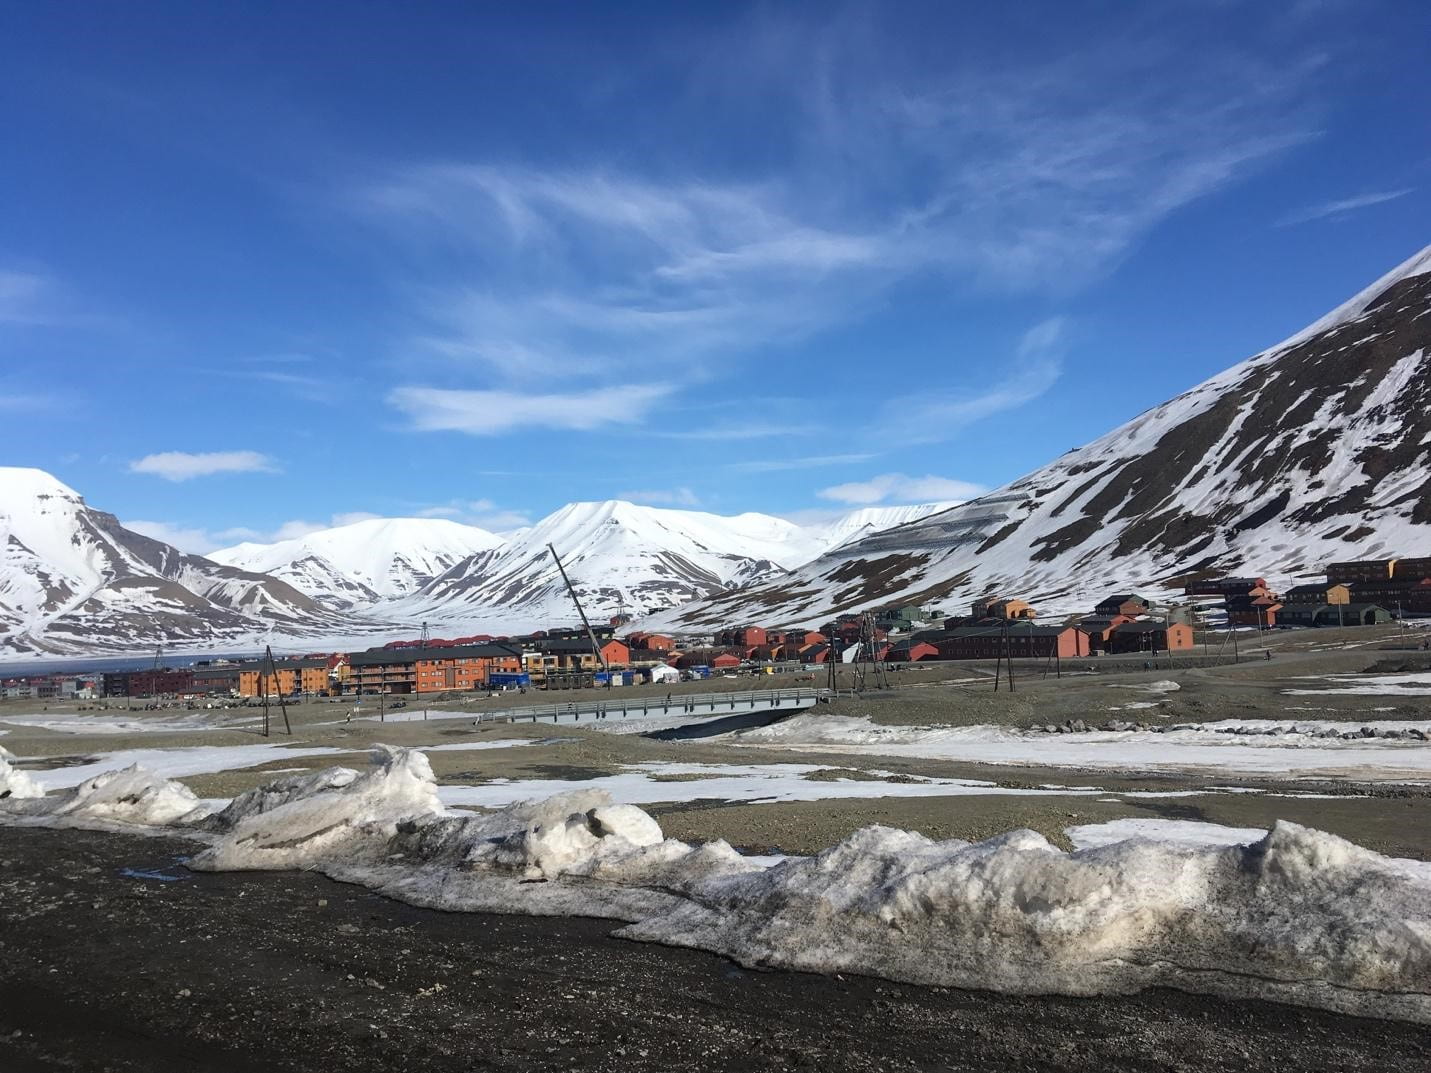 Snowy mountains in background, blue sky, orange buildings in distance, melting snow in foreground